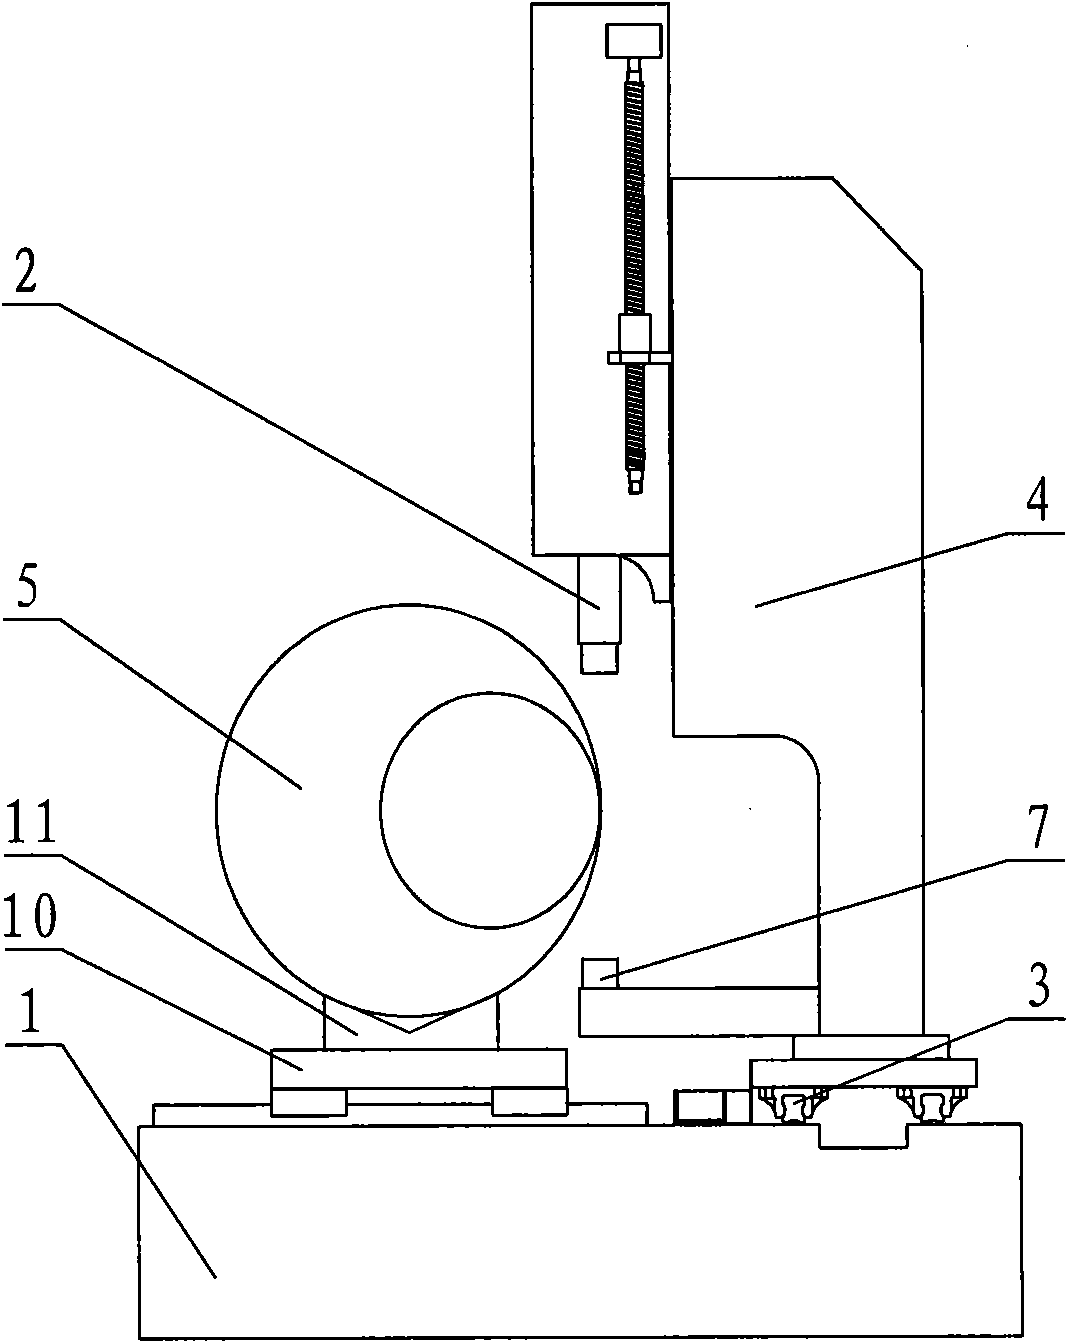 Non-contact scroll saw guide wheel slot type detector